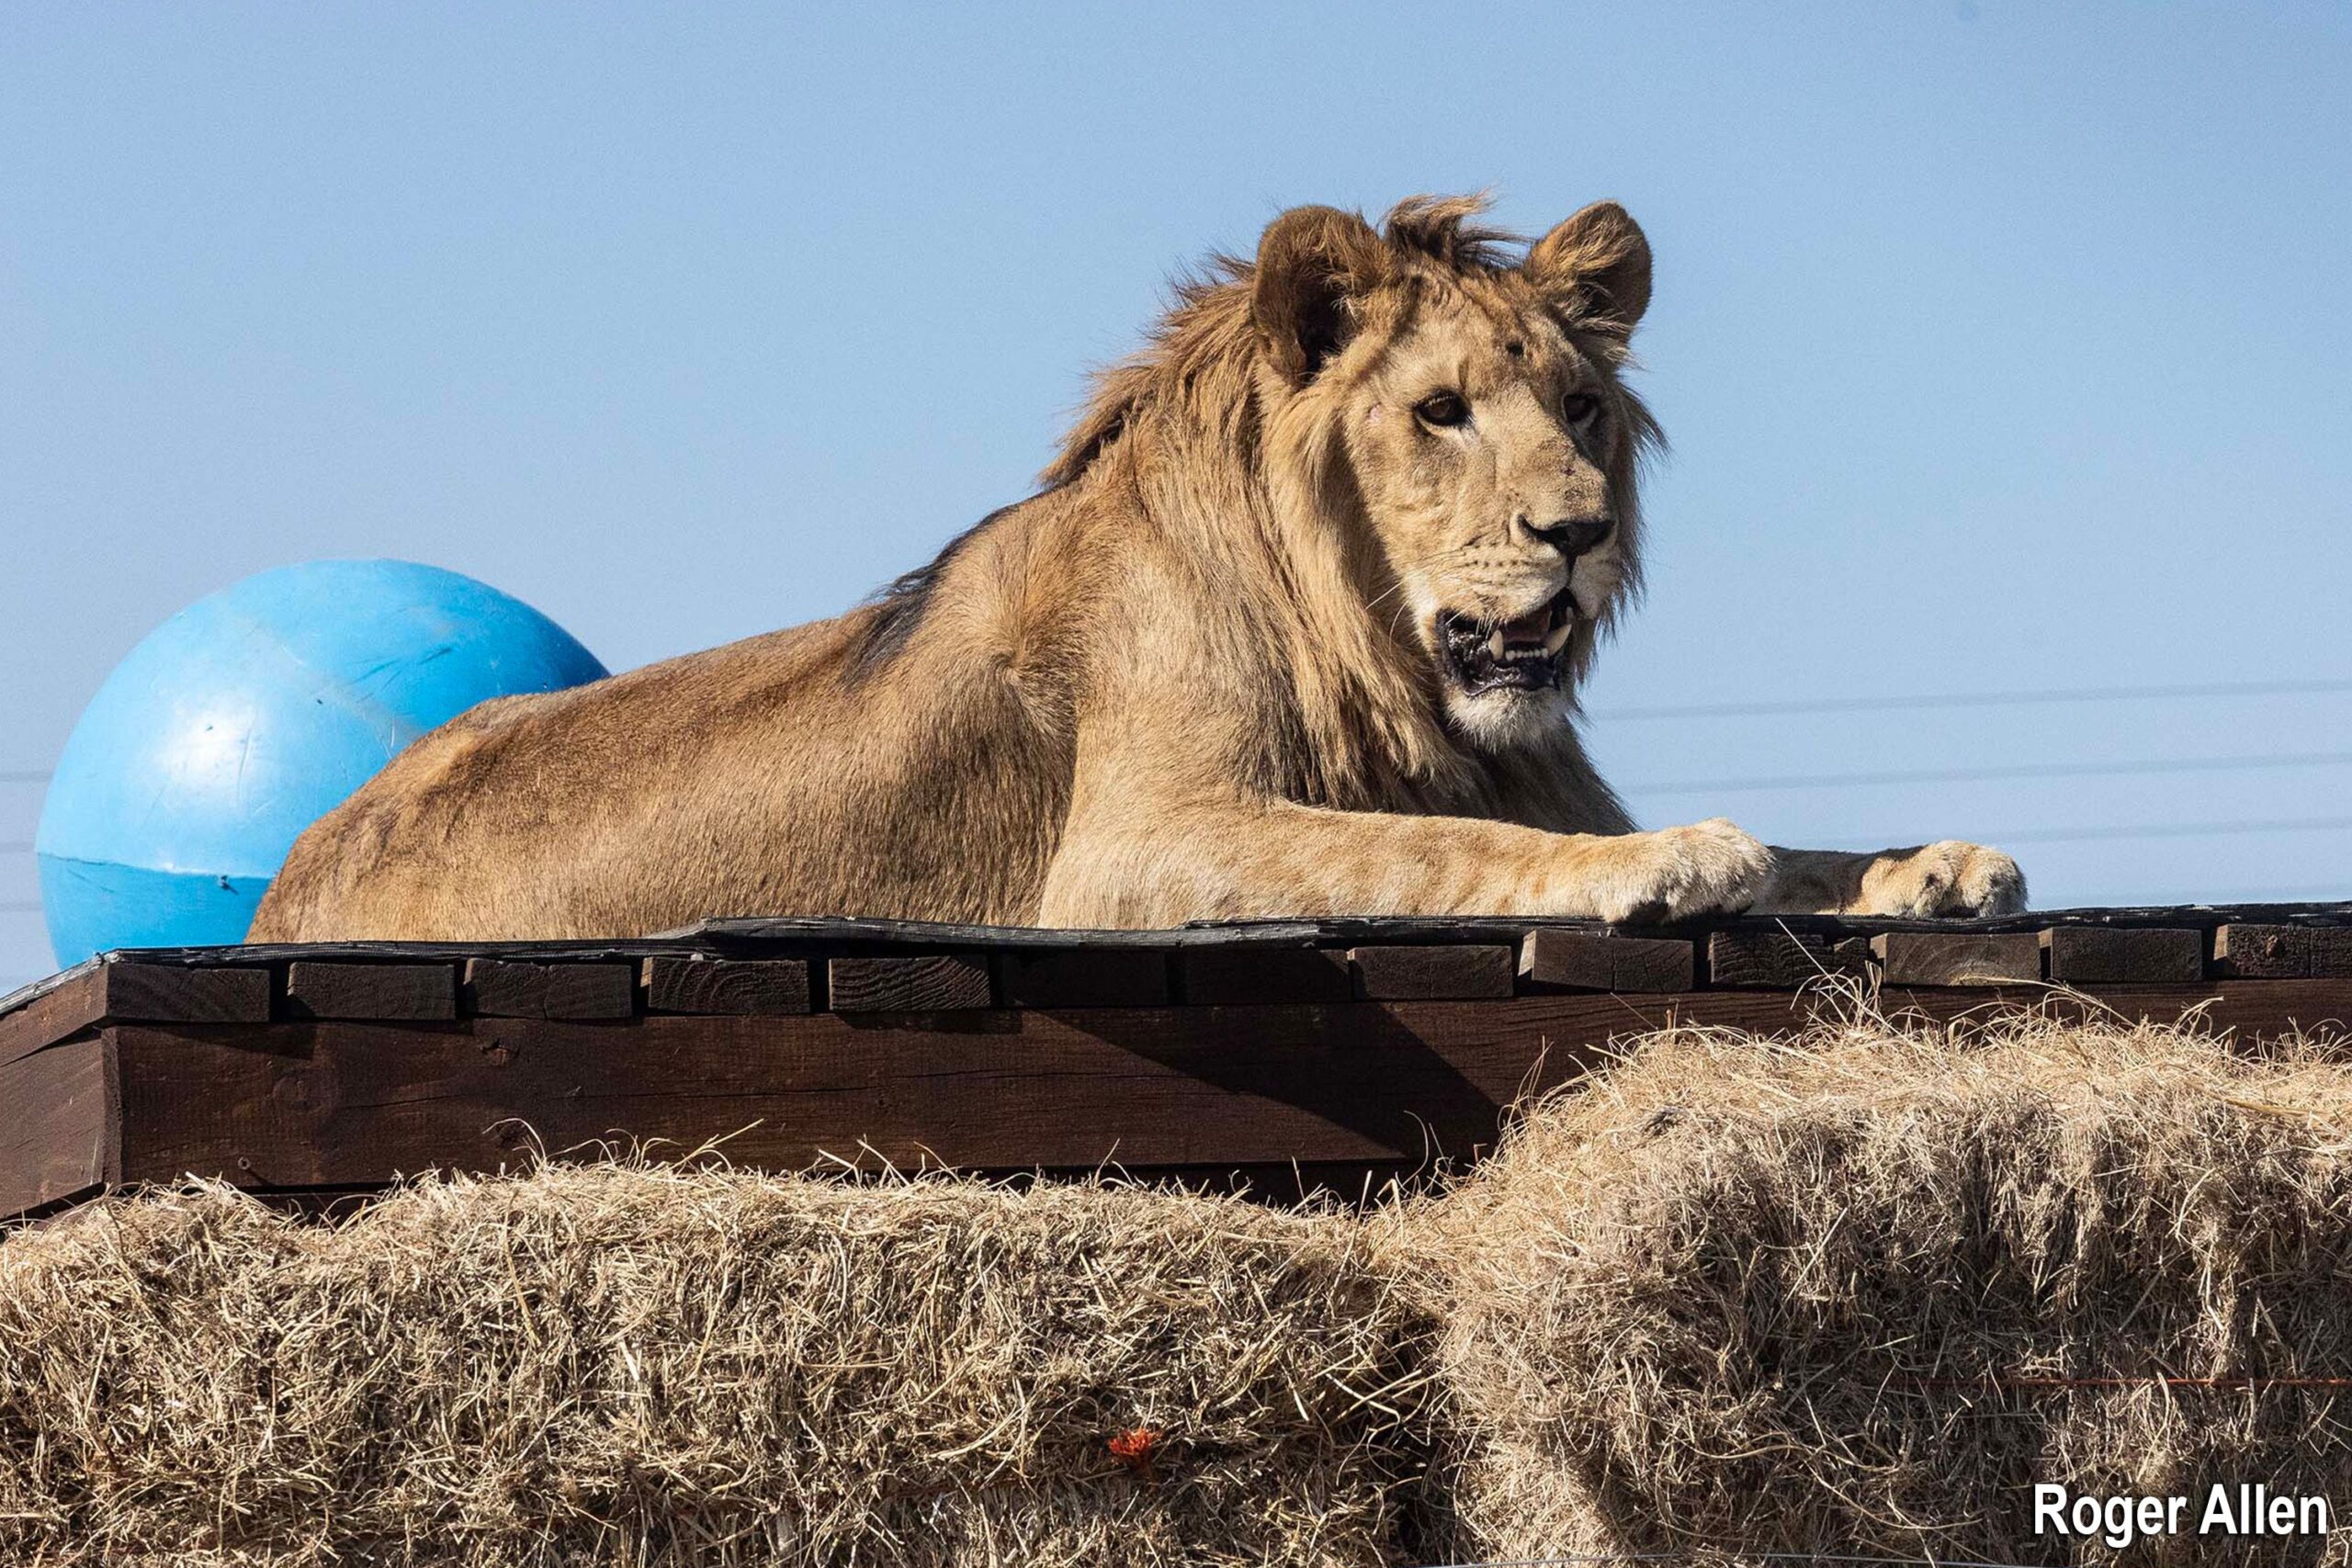 From Abandoned Pets to African Royalty as the Rescued Lions from kuwait Find New Life